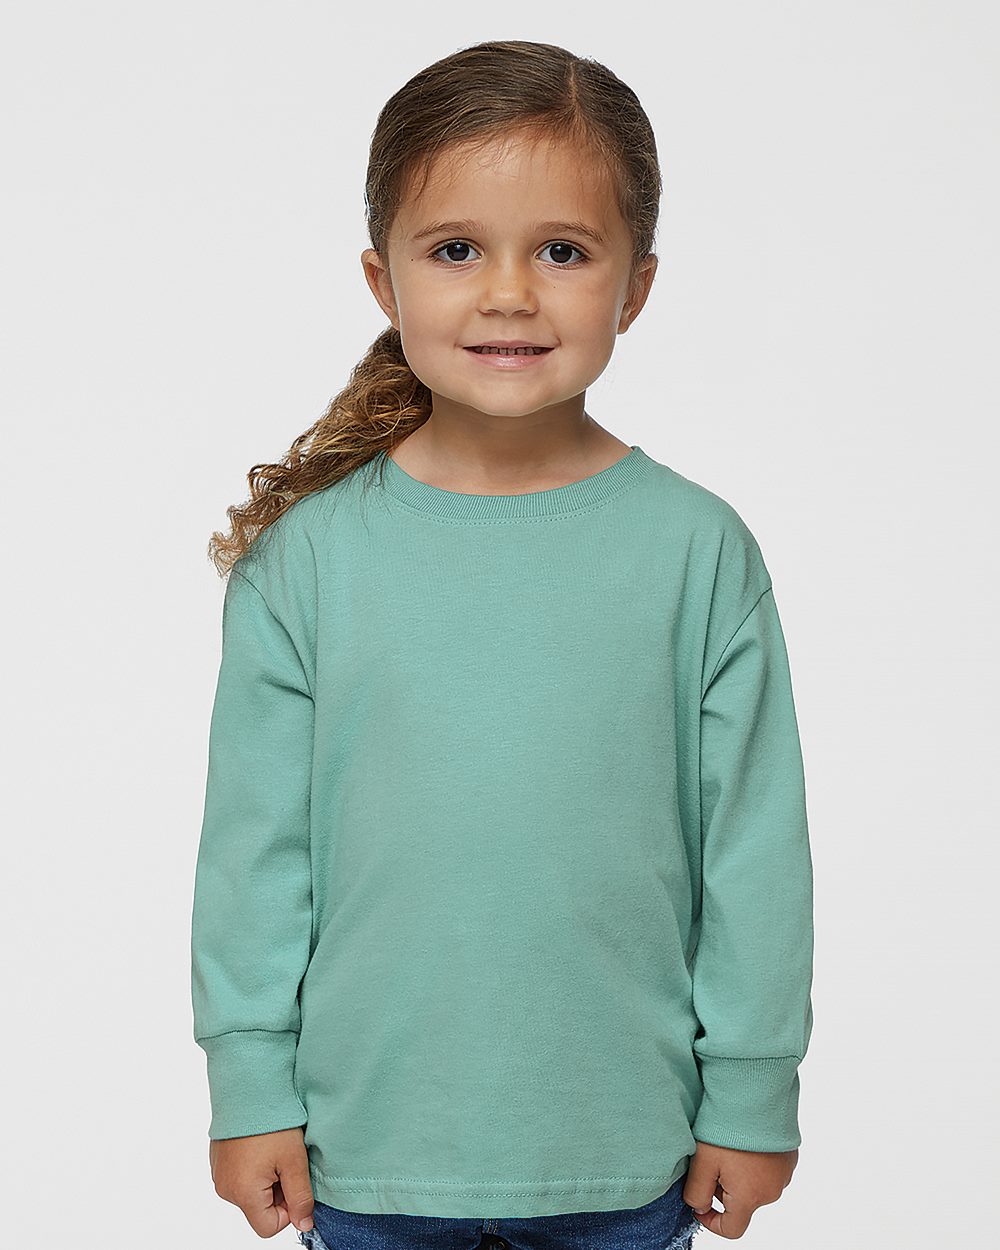 RABBIT SKINS Toddler Harborside M/élange French Terry Long Sleeve Crew Neck with Elbow Patches